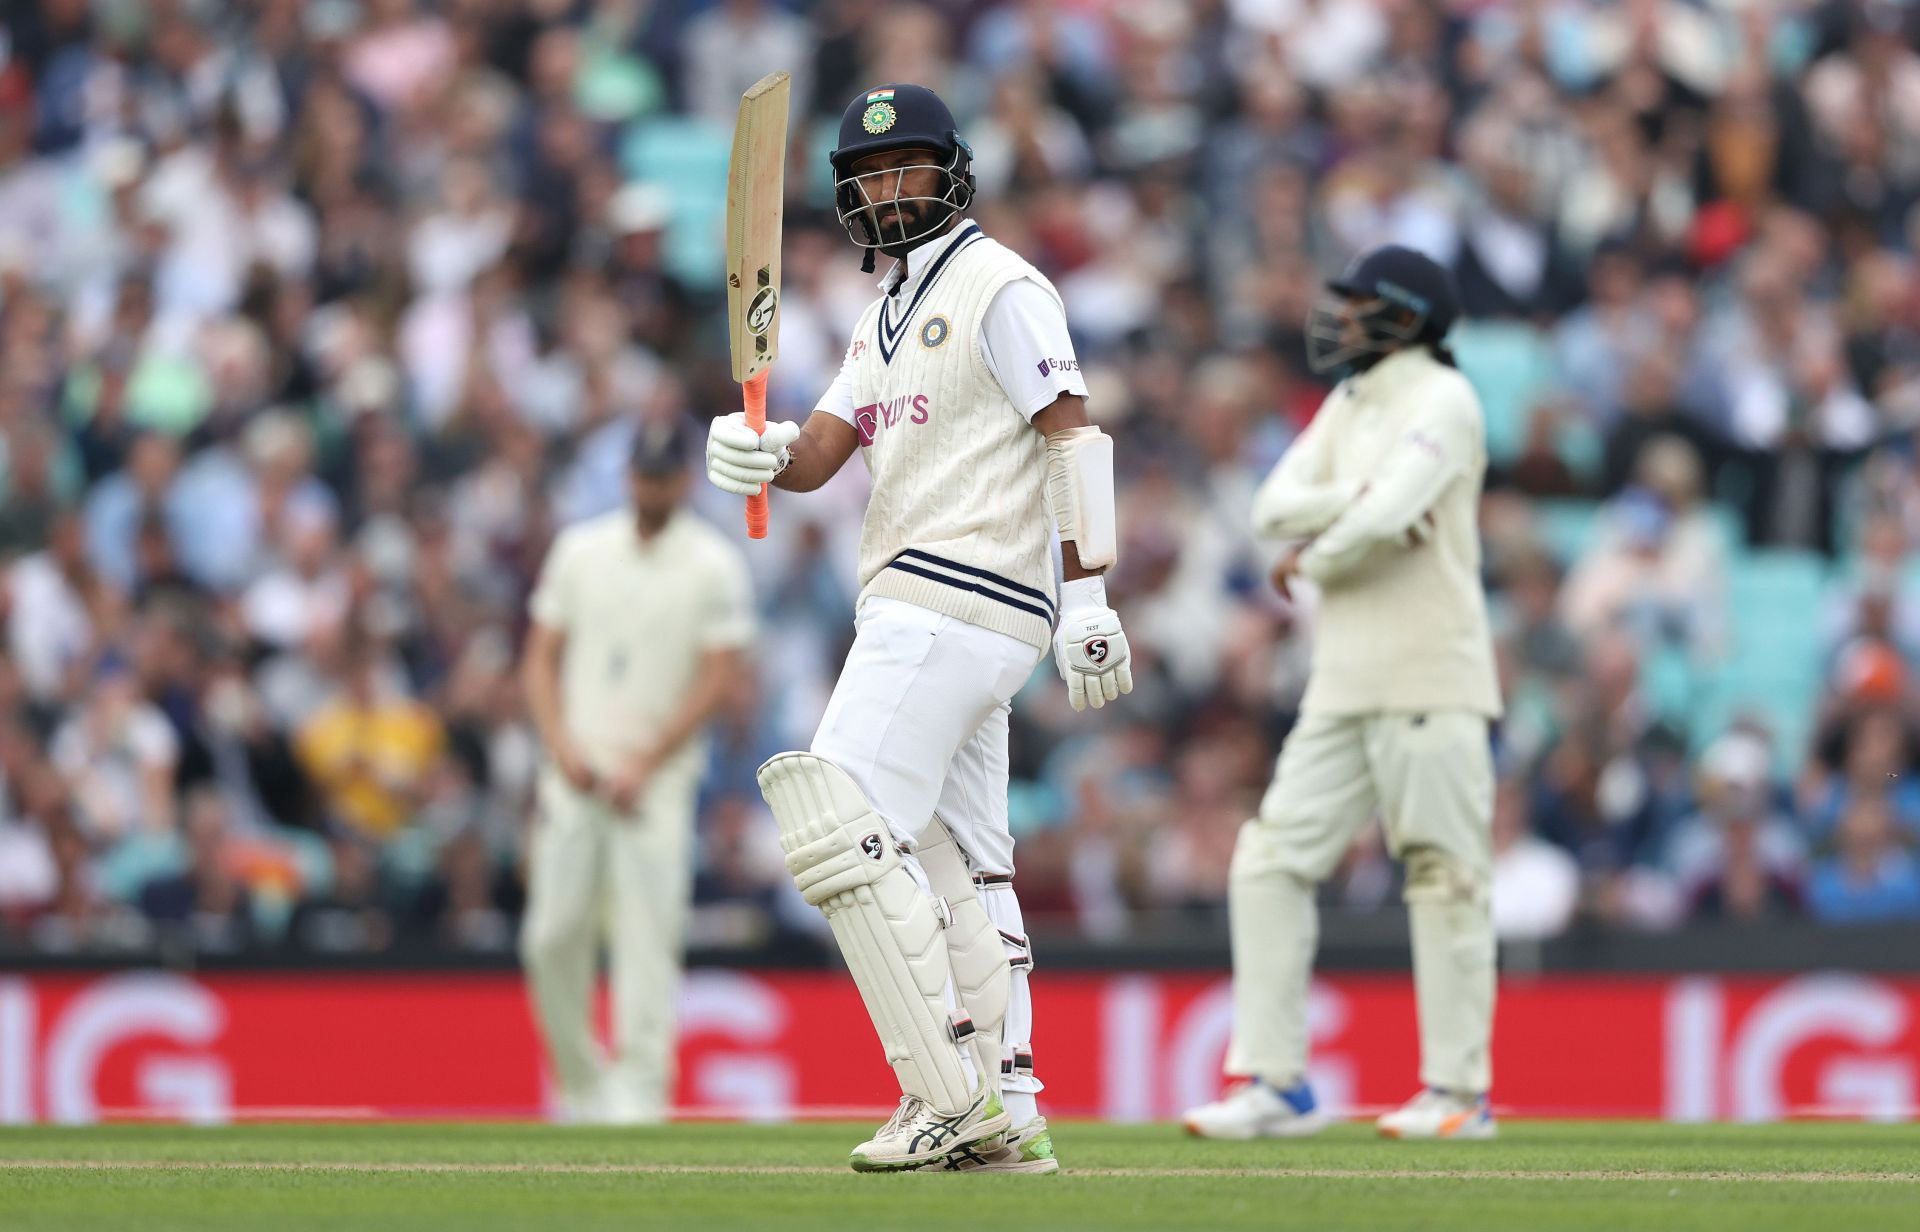 Pujara has registered a double ton against England. Pic: Getty Images